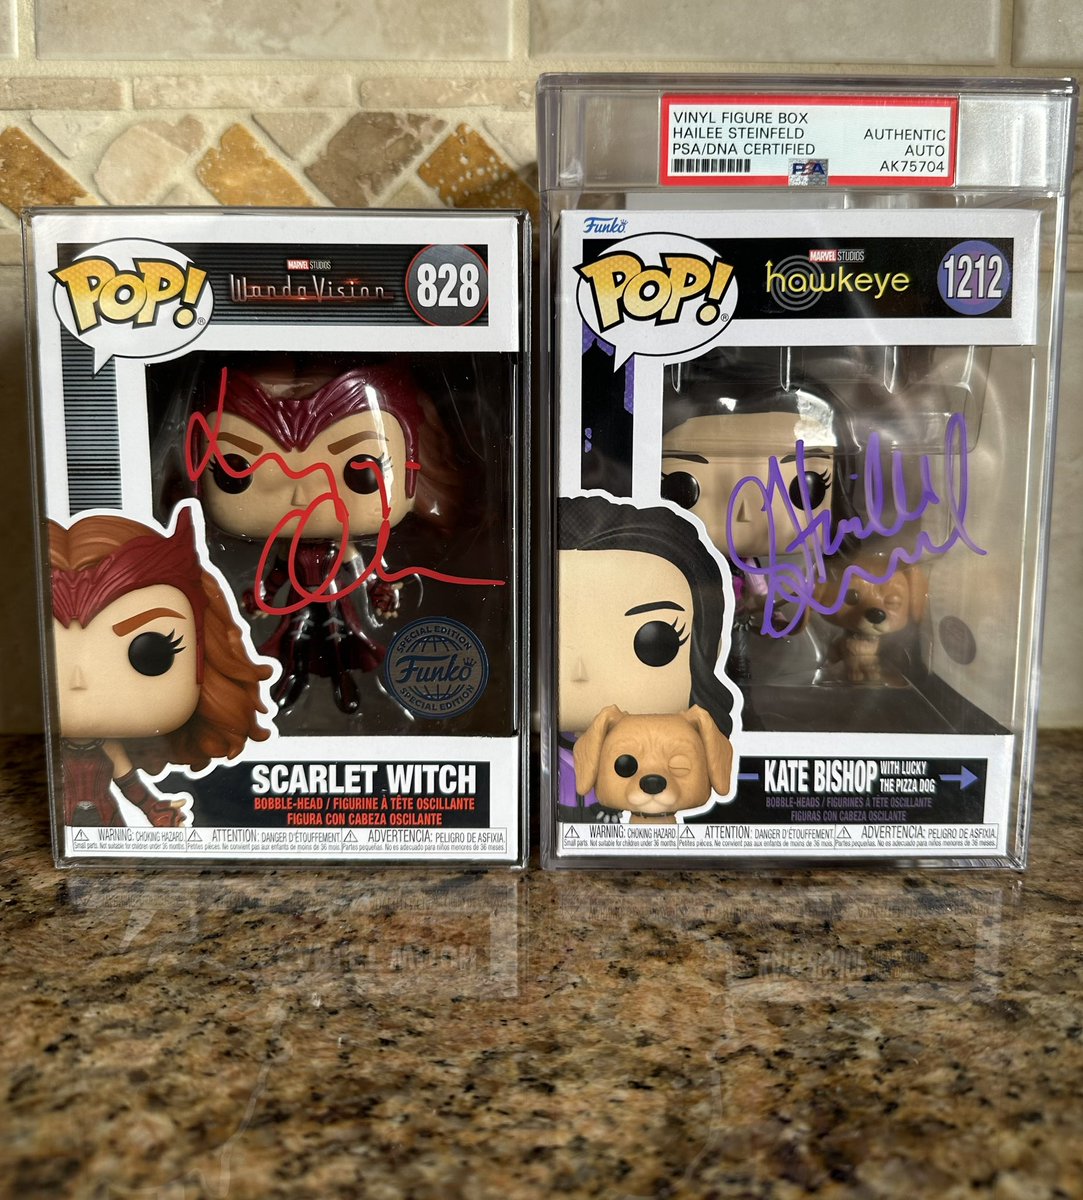 Mail Call! Got my signed Scarlet Witch & Kate Bishop Pops! . Thanks @chalicecollectibles for the assist. #Marvel #ScarletWitch #WandaVision #ElizabethOlsen #Hawkeye #KateBishop #HaileeSteinfeld #Funko #Collectibles #DisTrackers